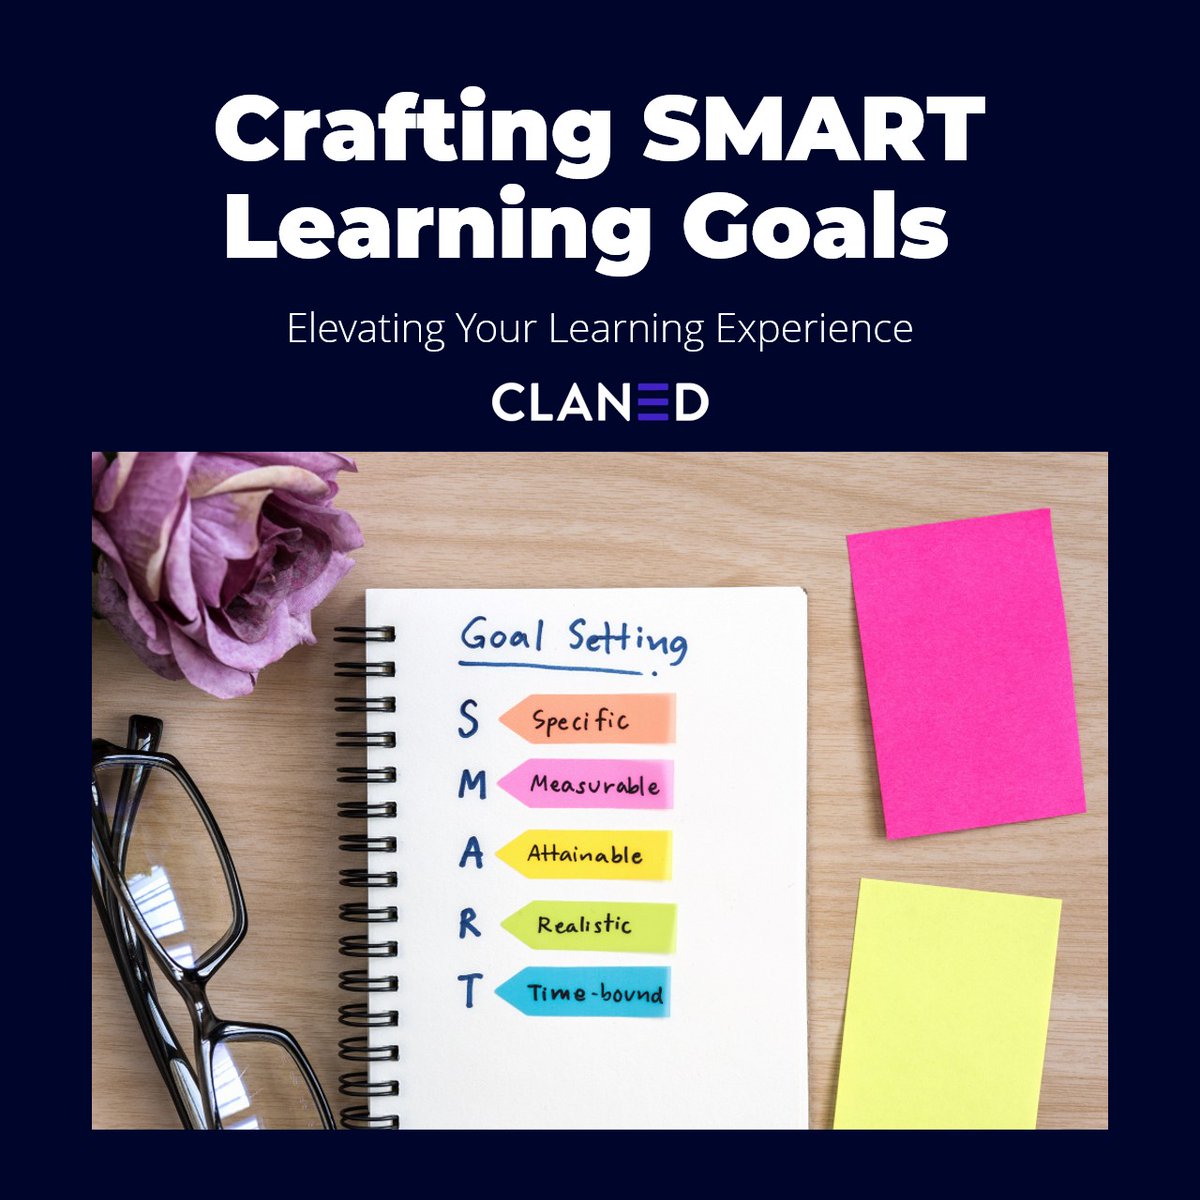 SMART Learning Goals, Expanded! Let’s not just set goals—let’s achieve them, measure them, and surpass them, turning aspirations into achievements that drive personal growth and organizational success. Steps are here bit.ly/49KvBgc #Claned #SMART #Learninggoals